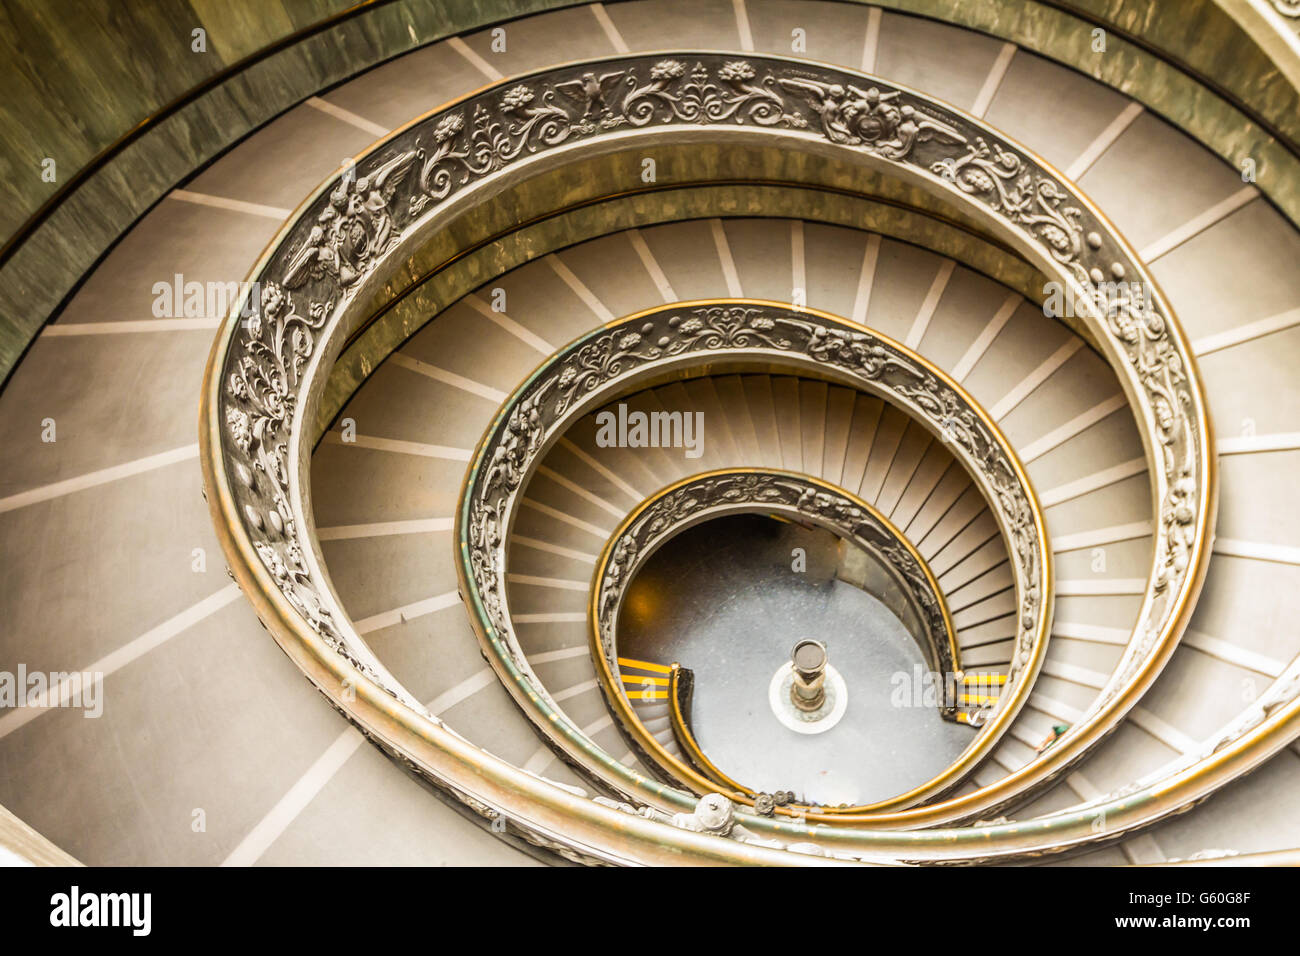 The famous spiral stairs in Vatican city Stock Photo